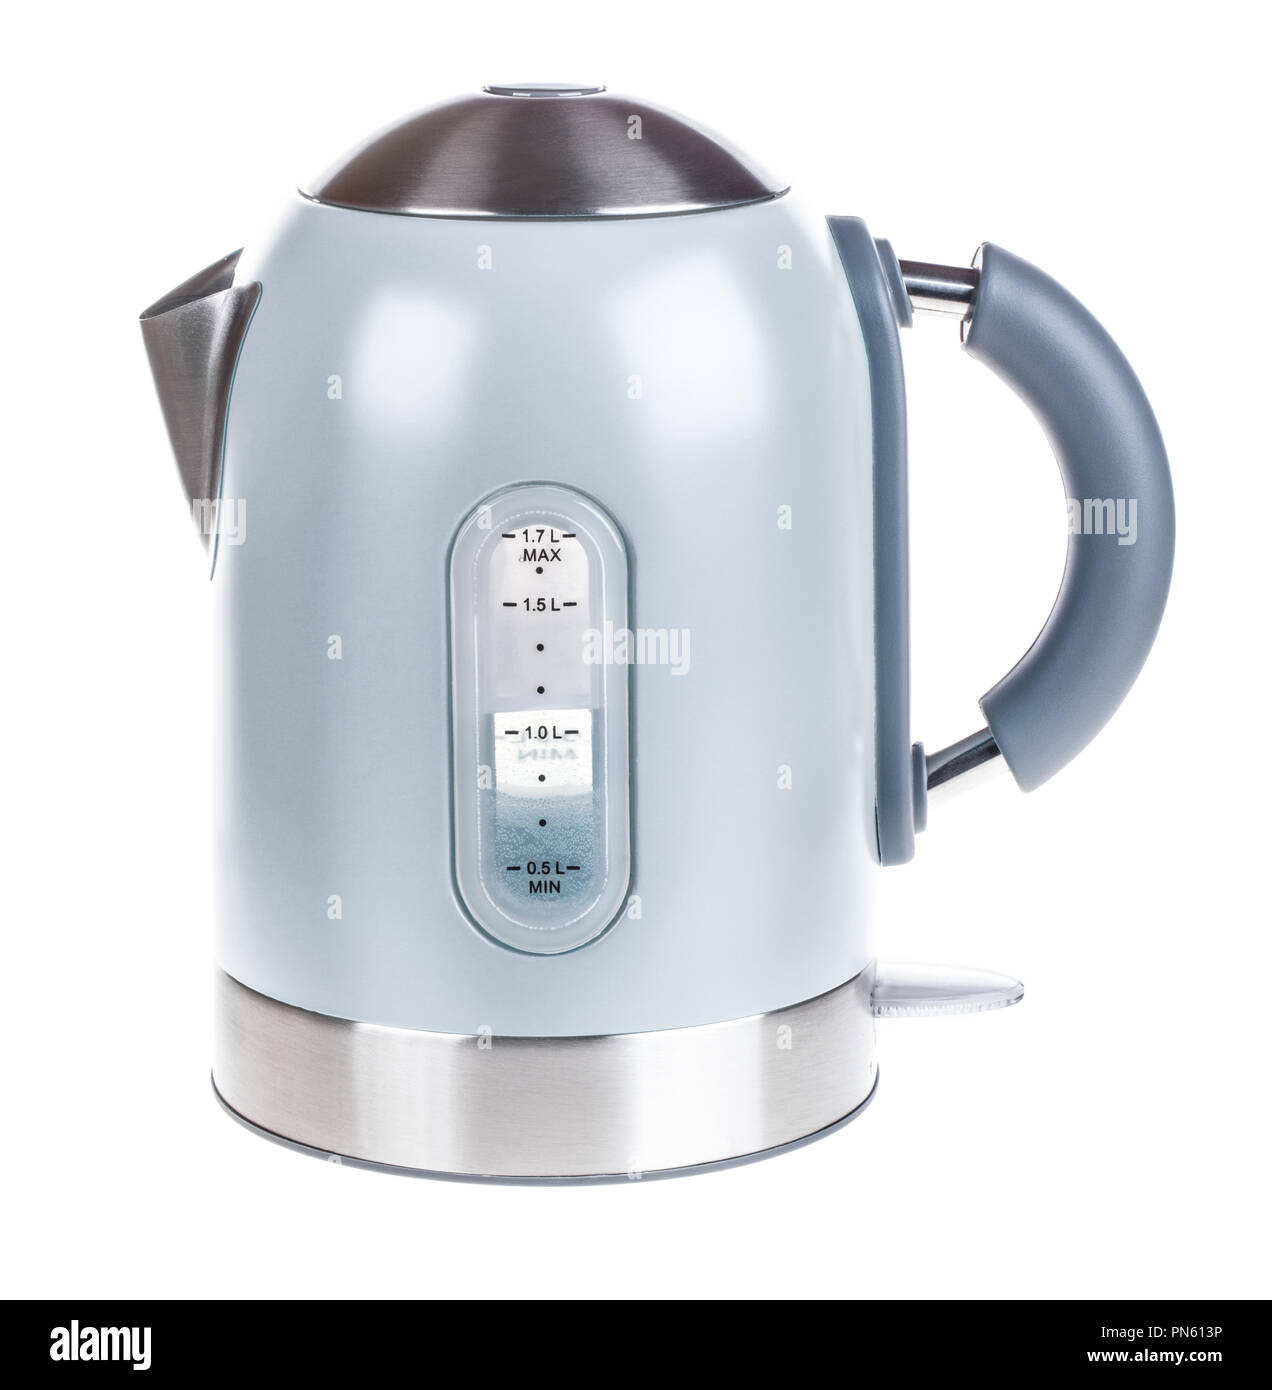 https://c8.alamy.com/comp/PN613P/grey-electric-kettle-isolated-on-white-PN613P.jpg